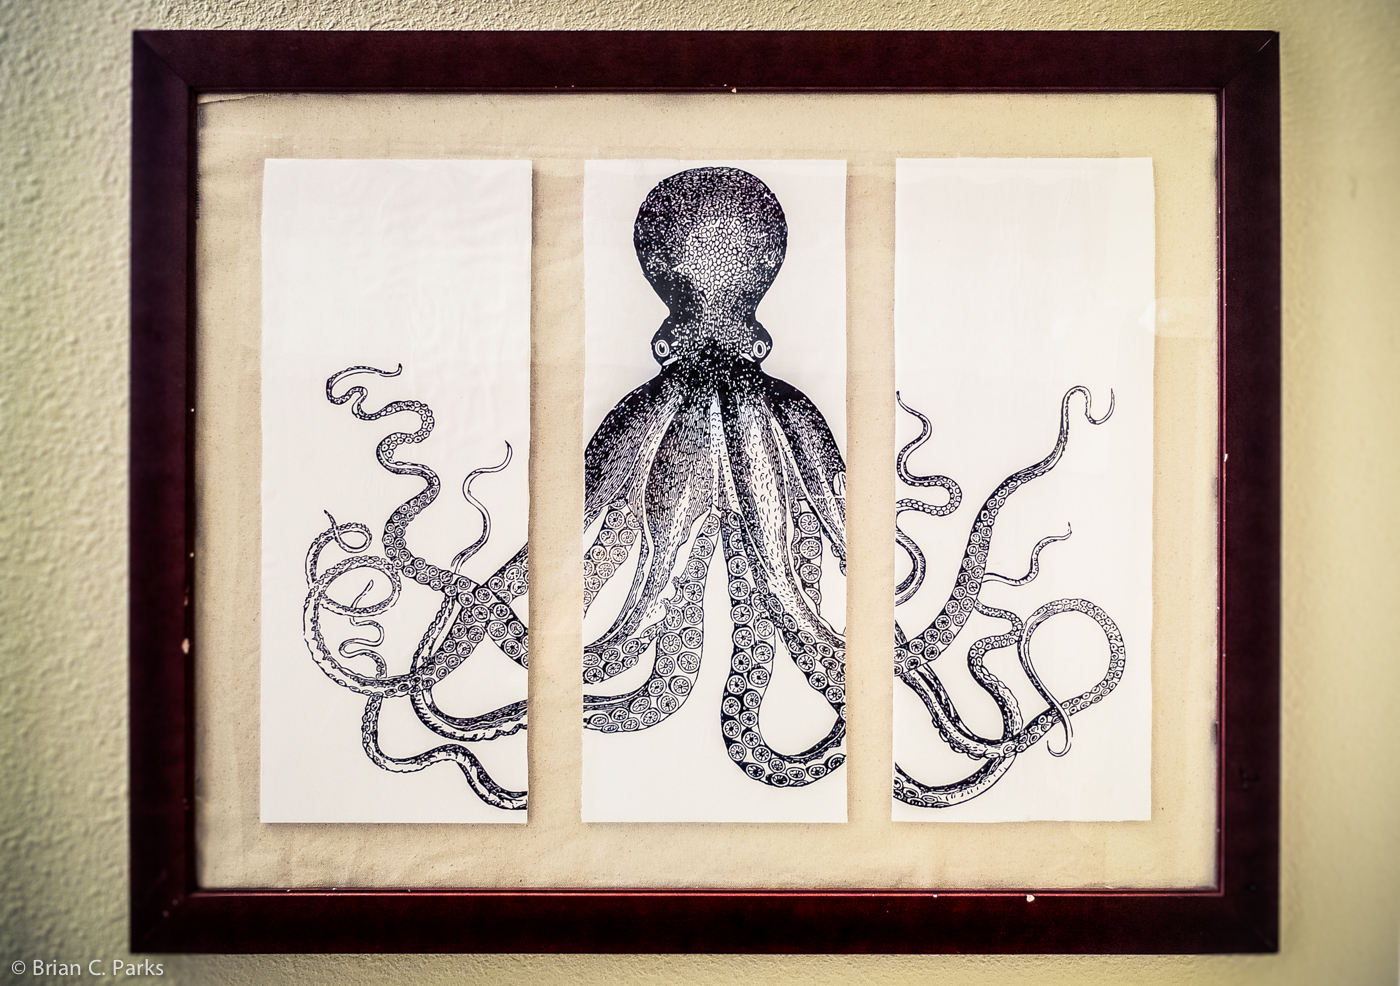 My completed Lord Bodner's octopus triptych.